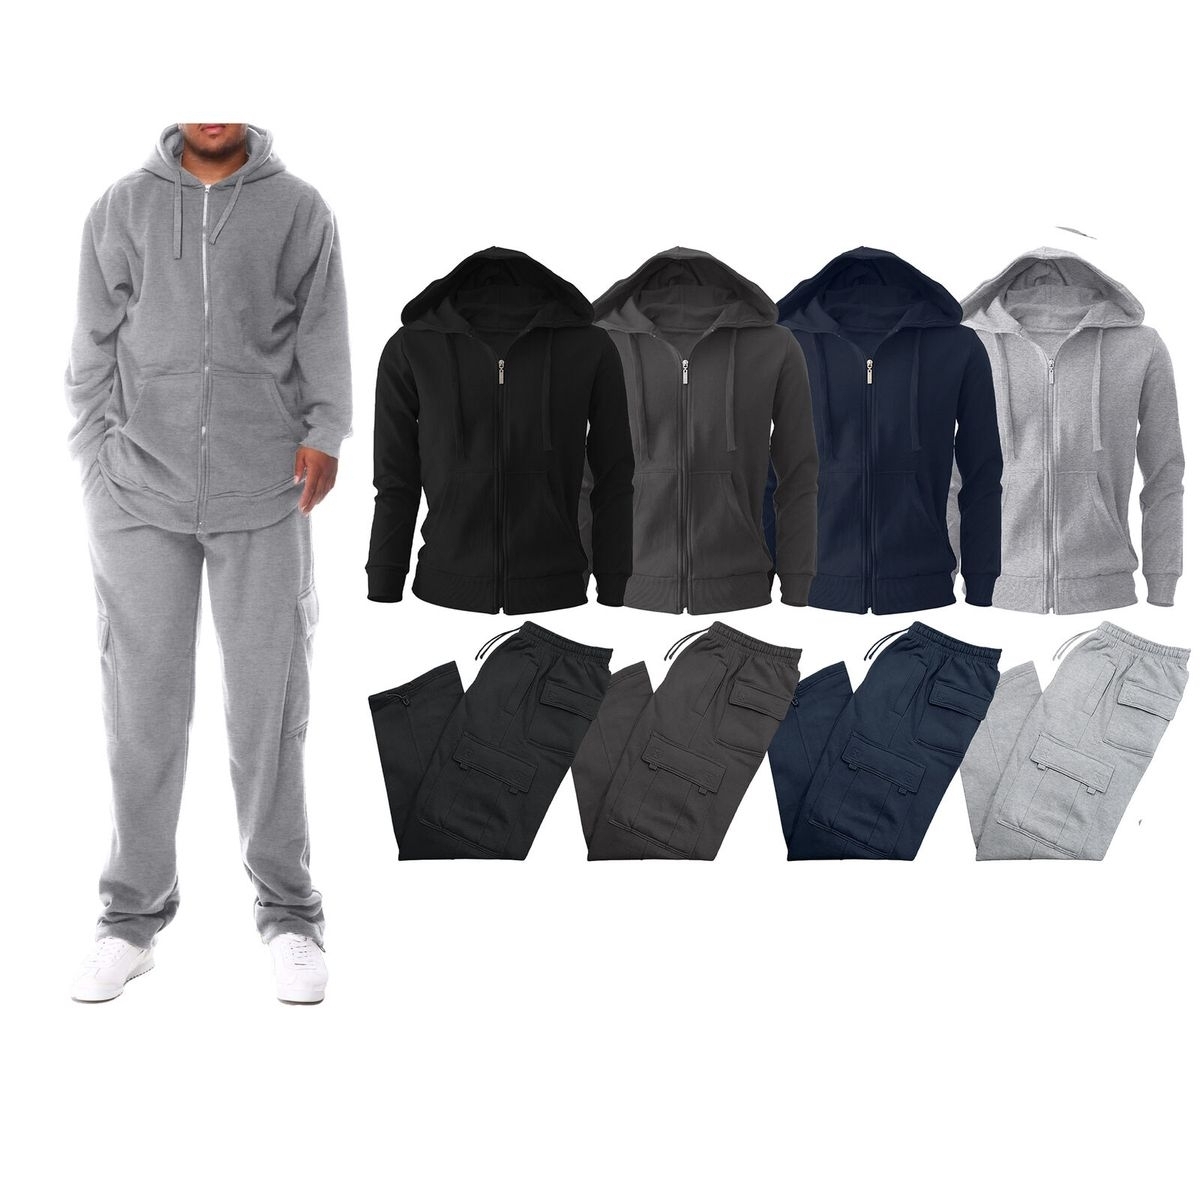 Multi-Pack: Men's Big & Tall Winter Warm Athletic Active Cozy Fleece Lined Multi-Pocket Full Zip Up Cargo Tracksuit - Charcoal, 2-pack, Larg